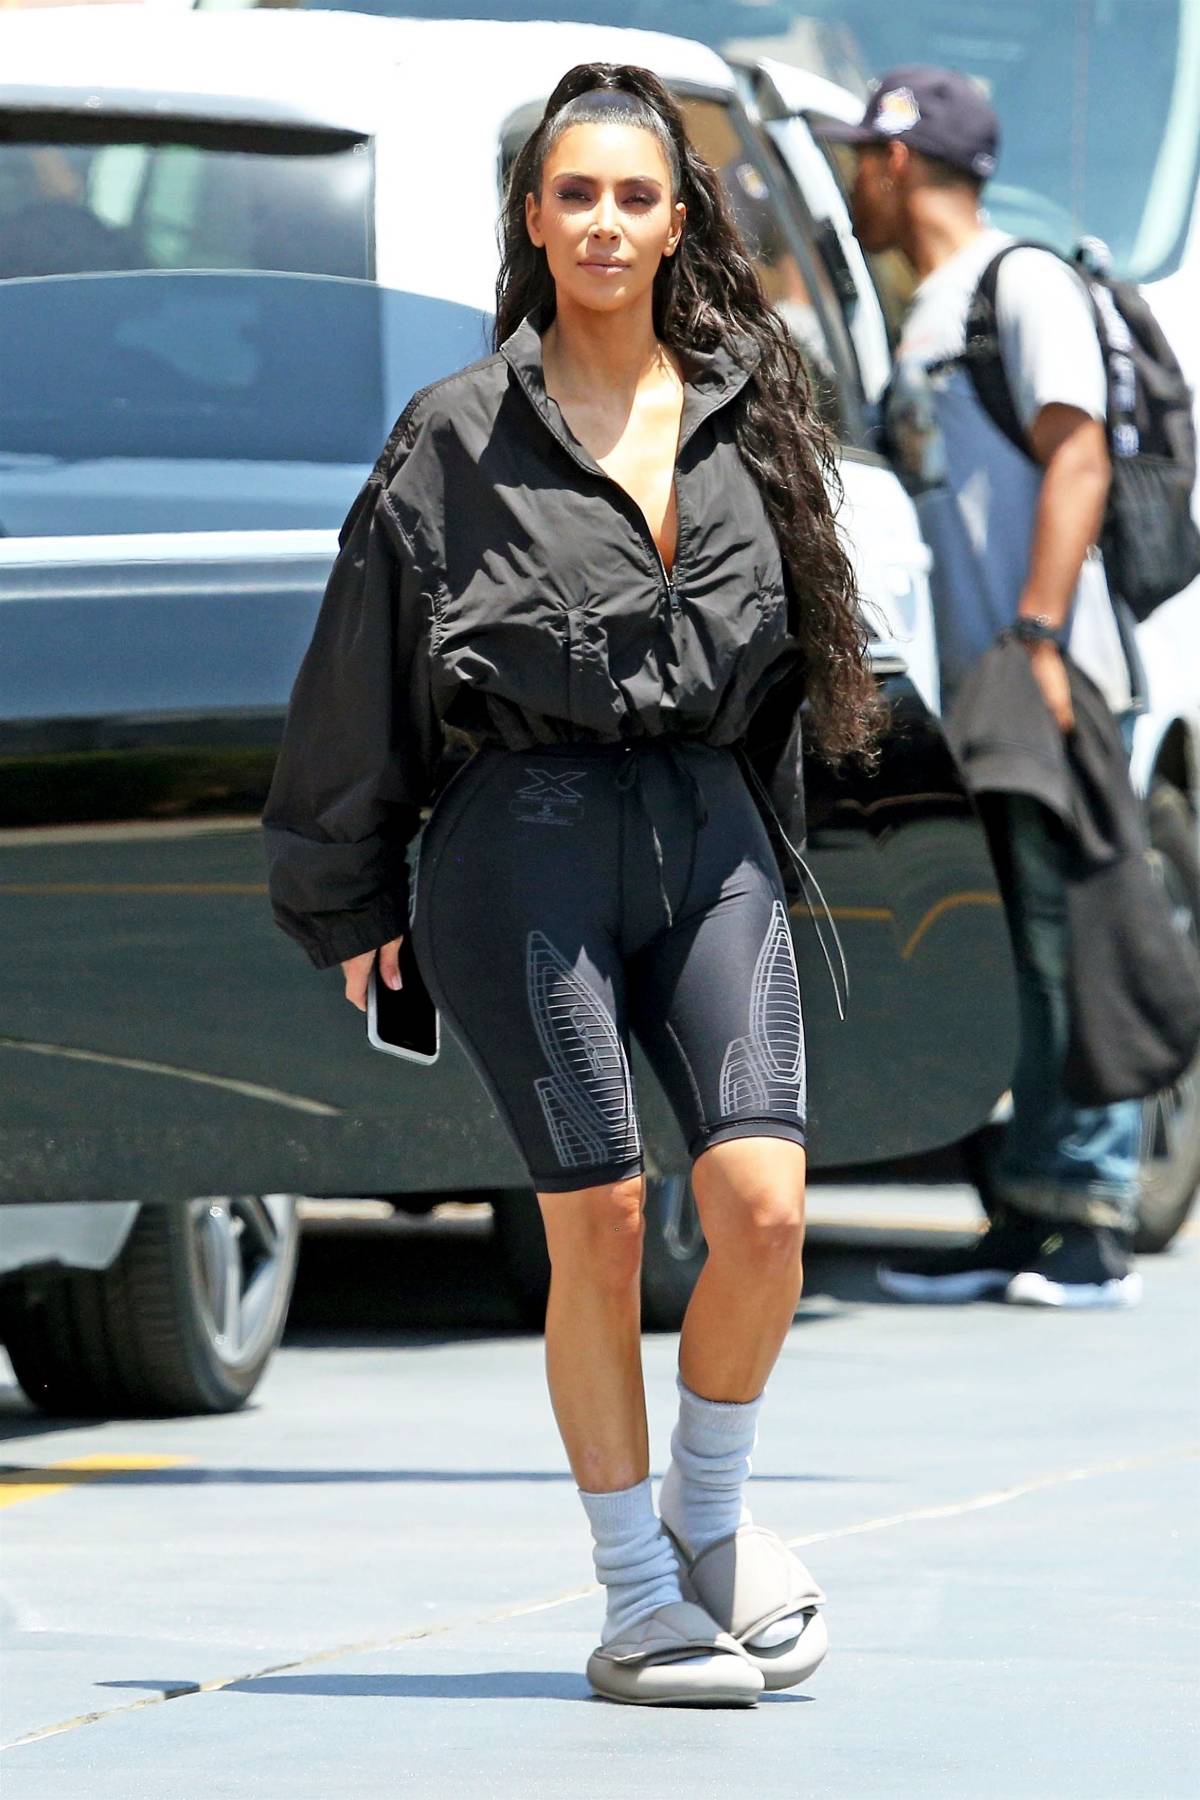 Spotted: Celebrities in Bike Shorts, The Hottest Athleisure Trend